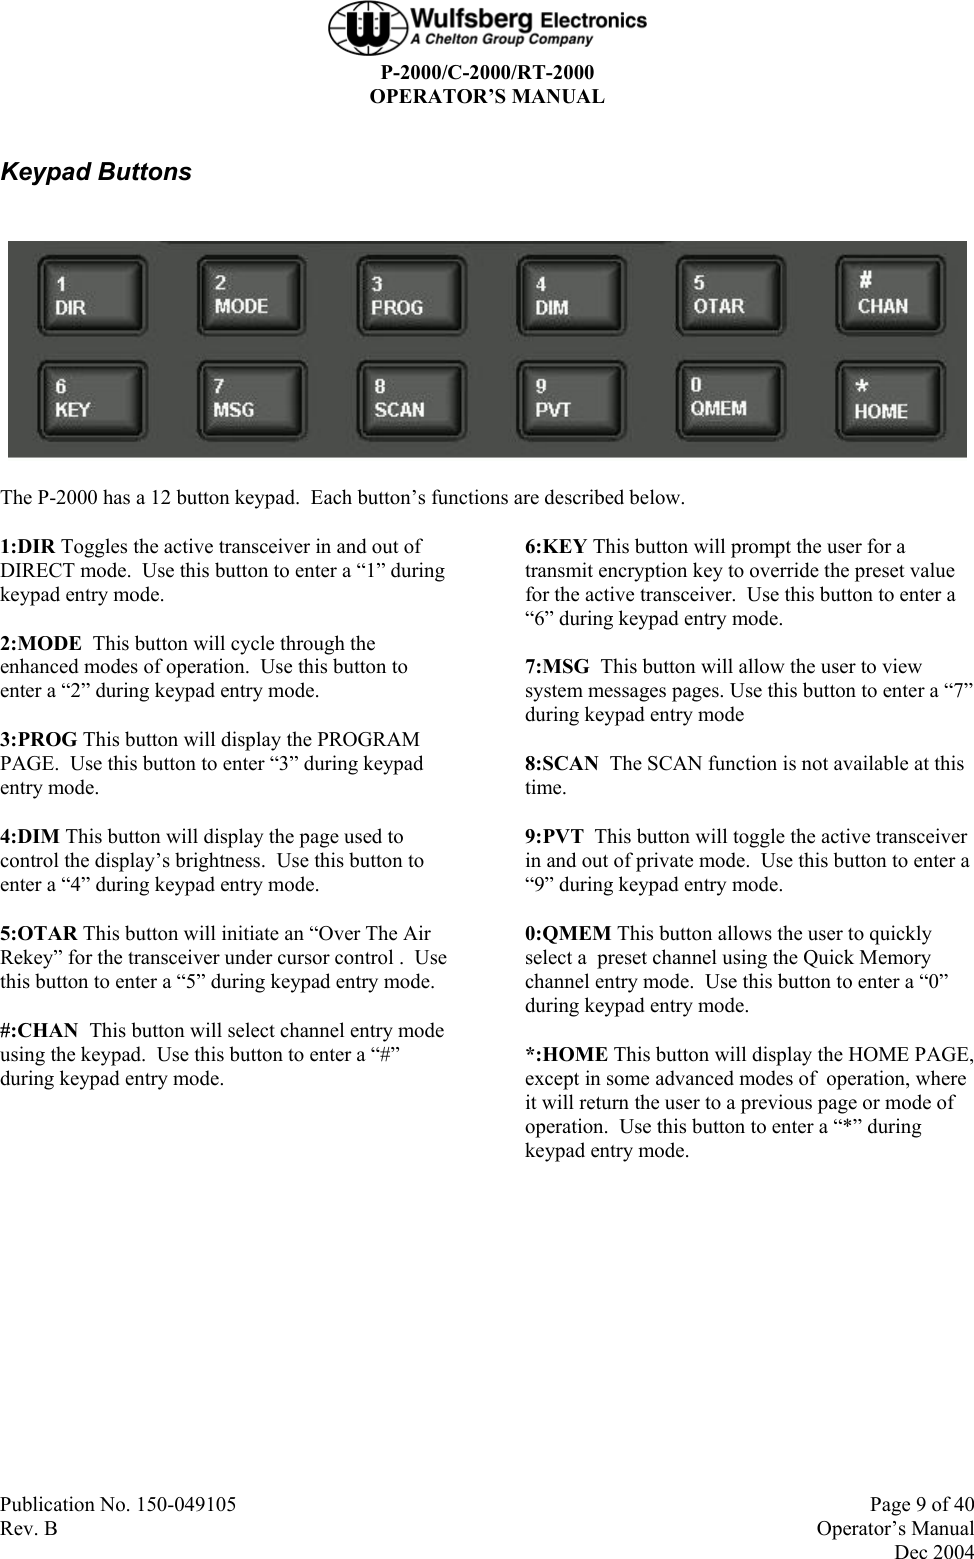  P-2000/C-2000/RT-2000 OPERATOR’S MANUAL  Publication No. 150-049105  Page 9 of 40 Rev. B  Operator’s Manual  Dec 2004 Keypad Buttons   The P-2000 has a 12 button keypad.  Each button’s functions are described below. 1:DIR Toggles the active transceiver in and out of DIRECT mode.  Use this button to enter a “1” during keypad entry mode. 2:MODE  This button will cycle through the enhanced modes of operation.  Use this button to enter a “2” during keypad entry mode. 3:PROG This button will display the PROGRAM PAGE.  Use this button to enter “3” during keypad entry mode. 4:DIM This button will display the page used to control the display’s brightness.  Use this button to enter a “4” during keypad entry mode. 5:OTAR This button will initiate an “Over The Air Rekey” for the transceiver under cursor control .  Use this button to enter a “5” during keypad entry mode. #:CHAN  This button will select channel entry mode using the keypad.  Use this button to enter a “#” during keypad entry mode.   6:KEY This button will prompt the user for a transmit encryption key to override the preset value for the active transceiver.  Use this button to enter a “6” during keypad entry mode. 7:MSG  This button will allow the user to view system messages pages. Use this button to enter a “7” during keypad entry mode 8:SCAN  The SCAN function is not available at this time. 9:PVT  This button will toggle the active transceiver in and out of private mode.  Use this button to enter a “9” during keypad entry mode. 0:QMEM This button allows the user to quickly select a  preset channel using the Quick Memory channel entry mode.  Use this button to enter a “0” during keypad entry mode. *:HOME This button will display the HOME PAGE, except in some advanced modes of  operation, where it will return the user to a previous page or mode of operation.  Use this button to enter a “*” during keypad entry mode.  